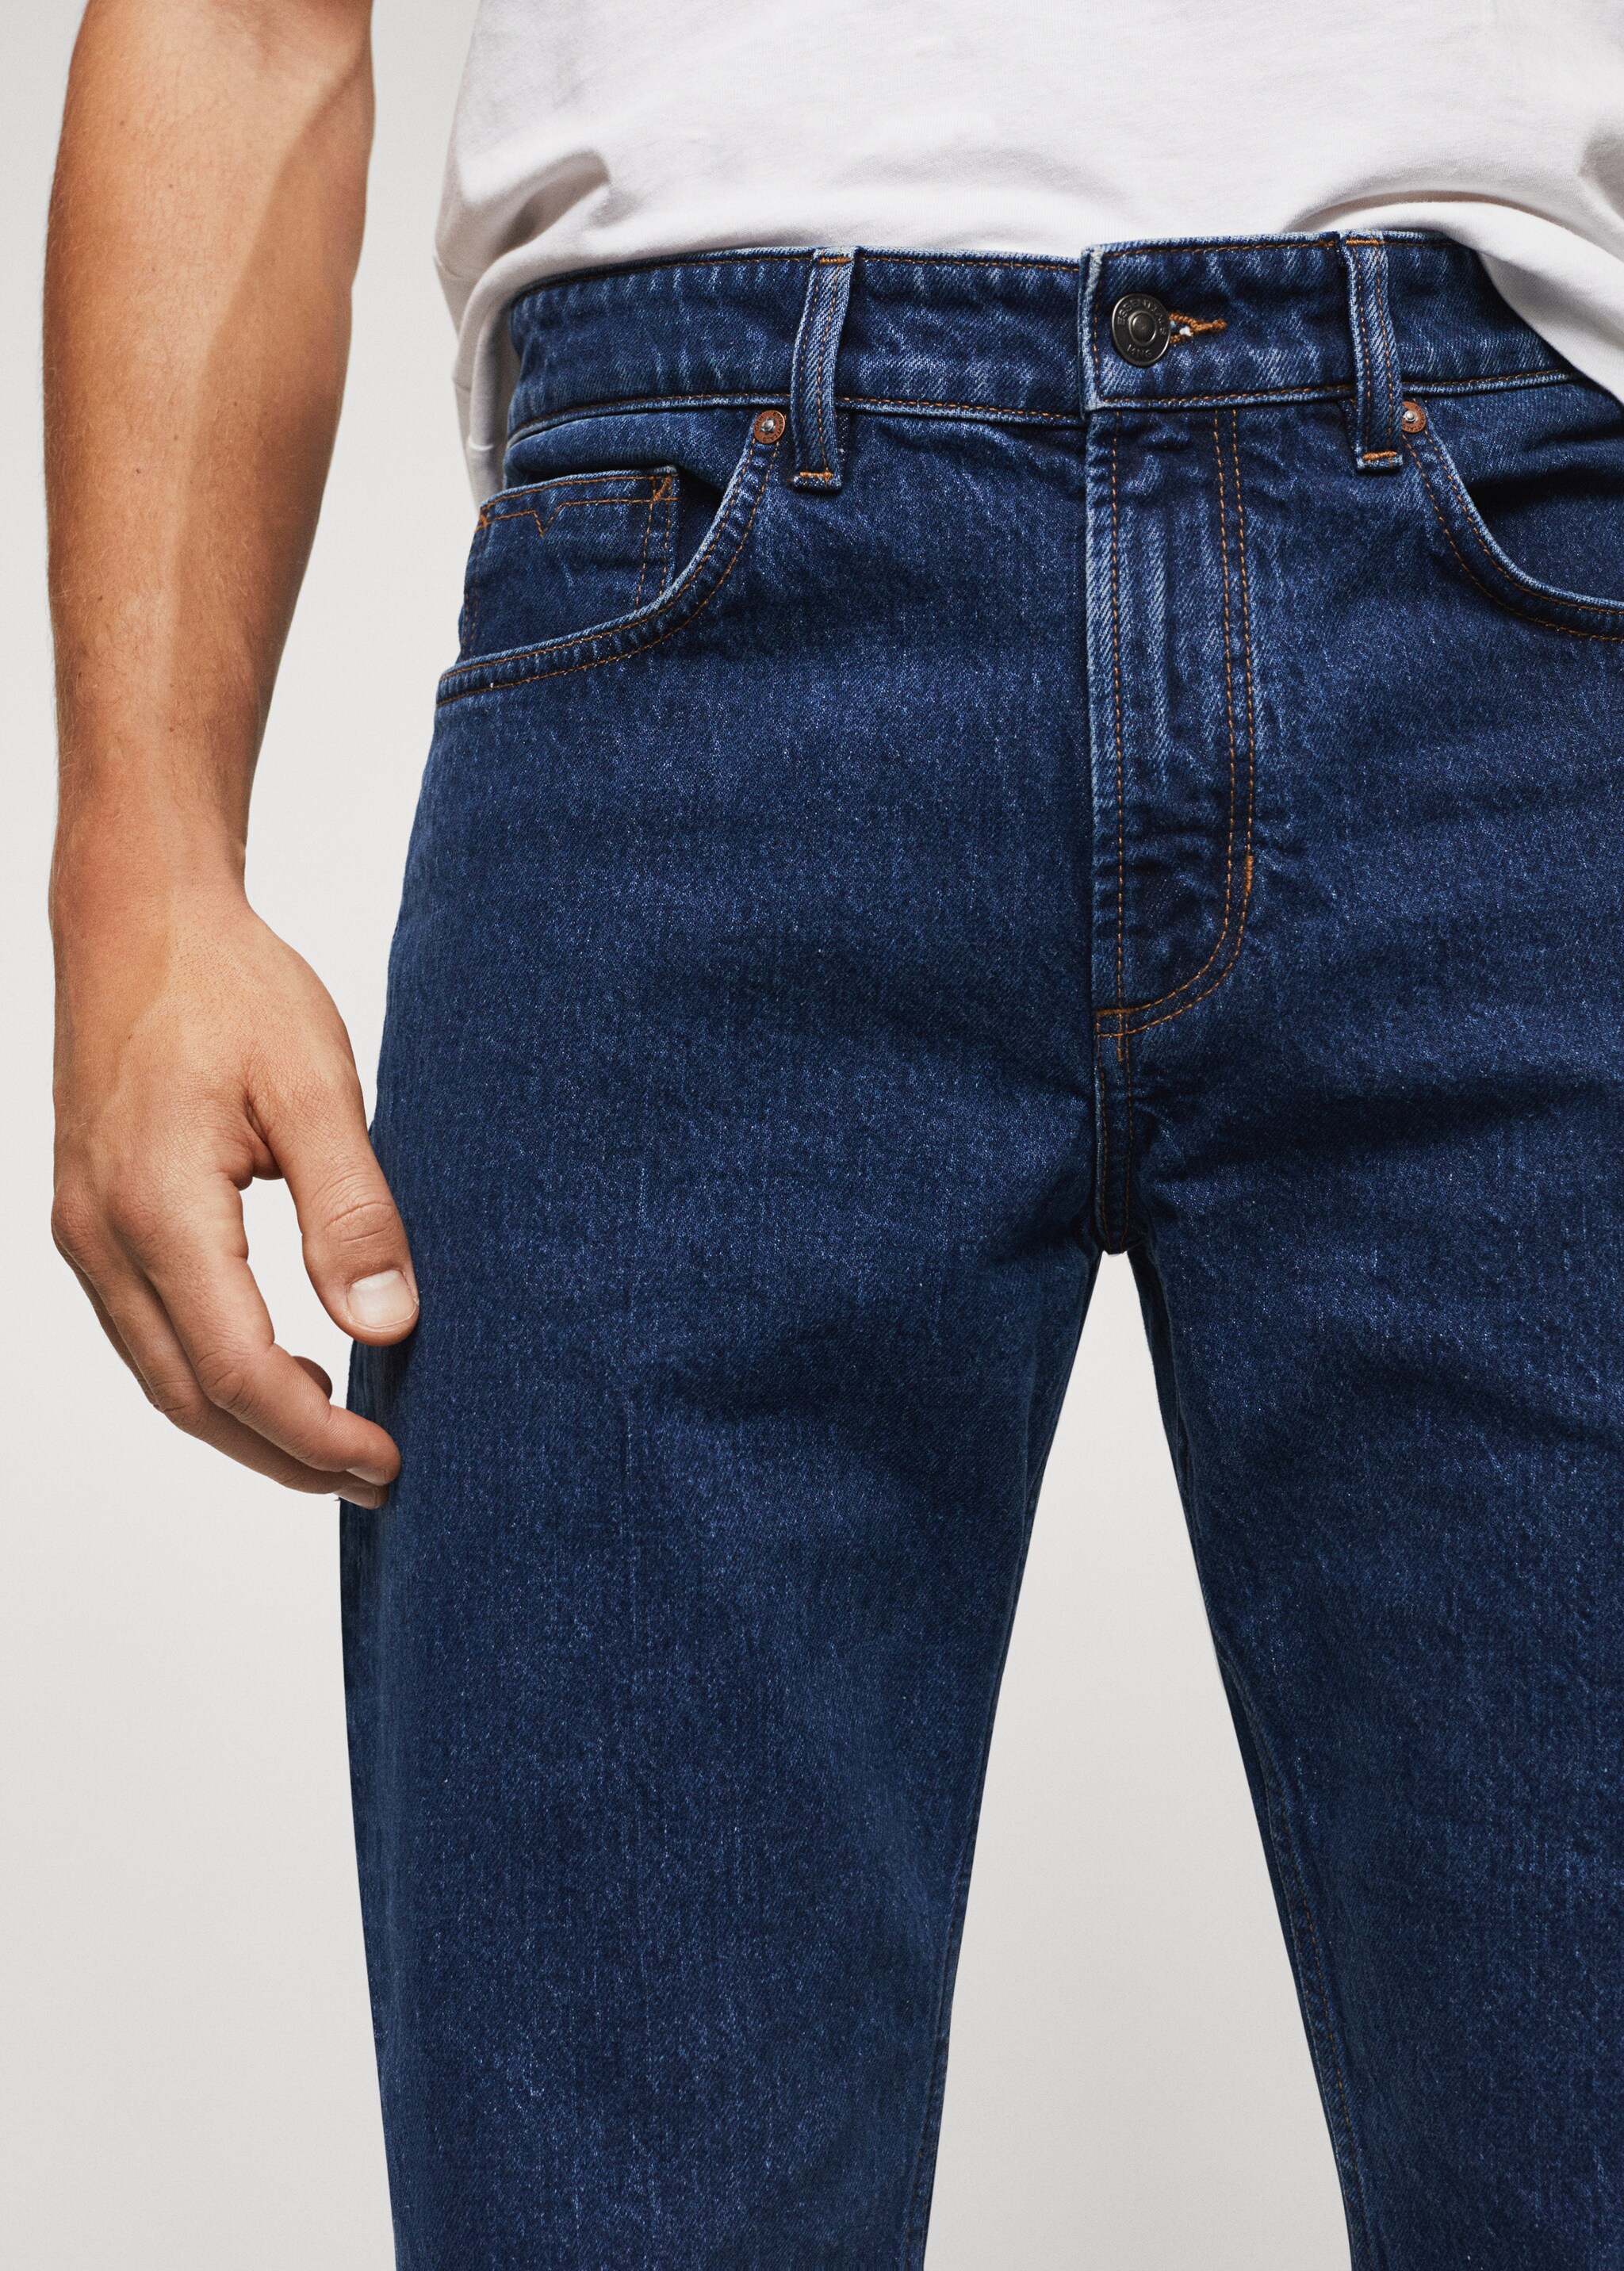 Ben tapered cropped jeans - Details of the article 1